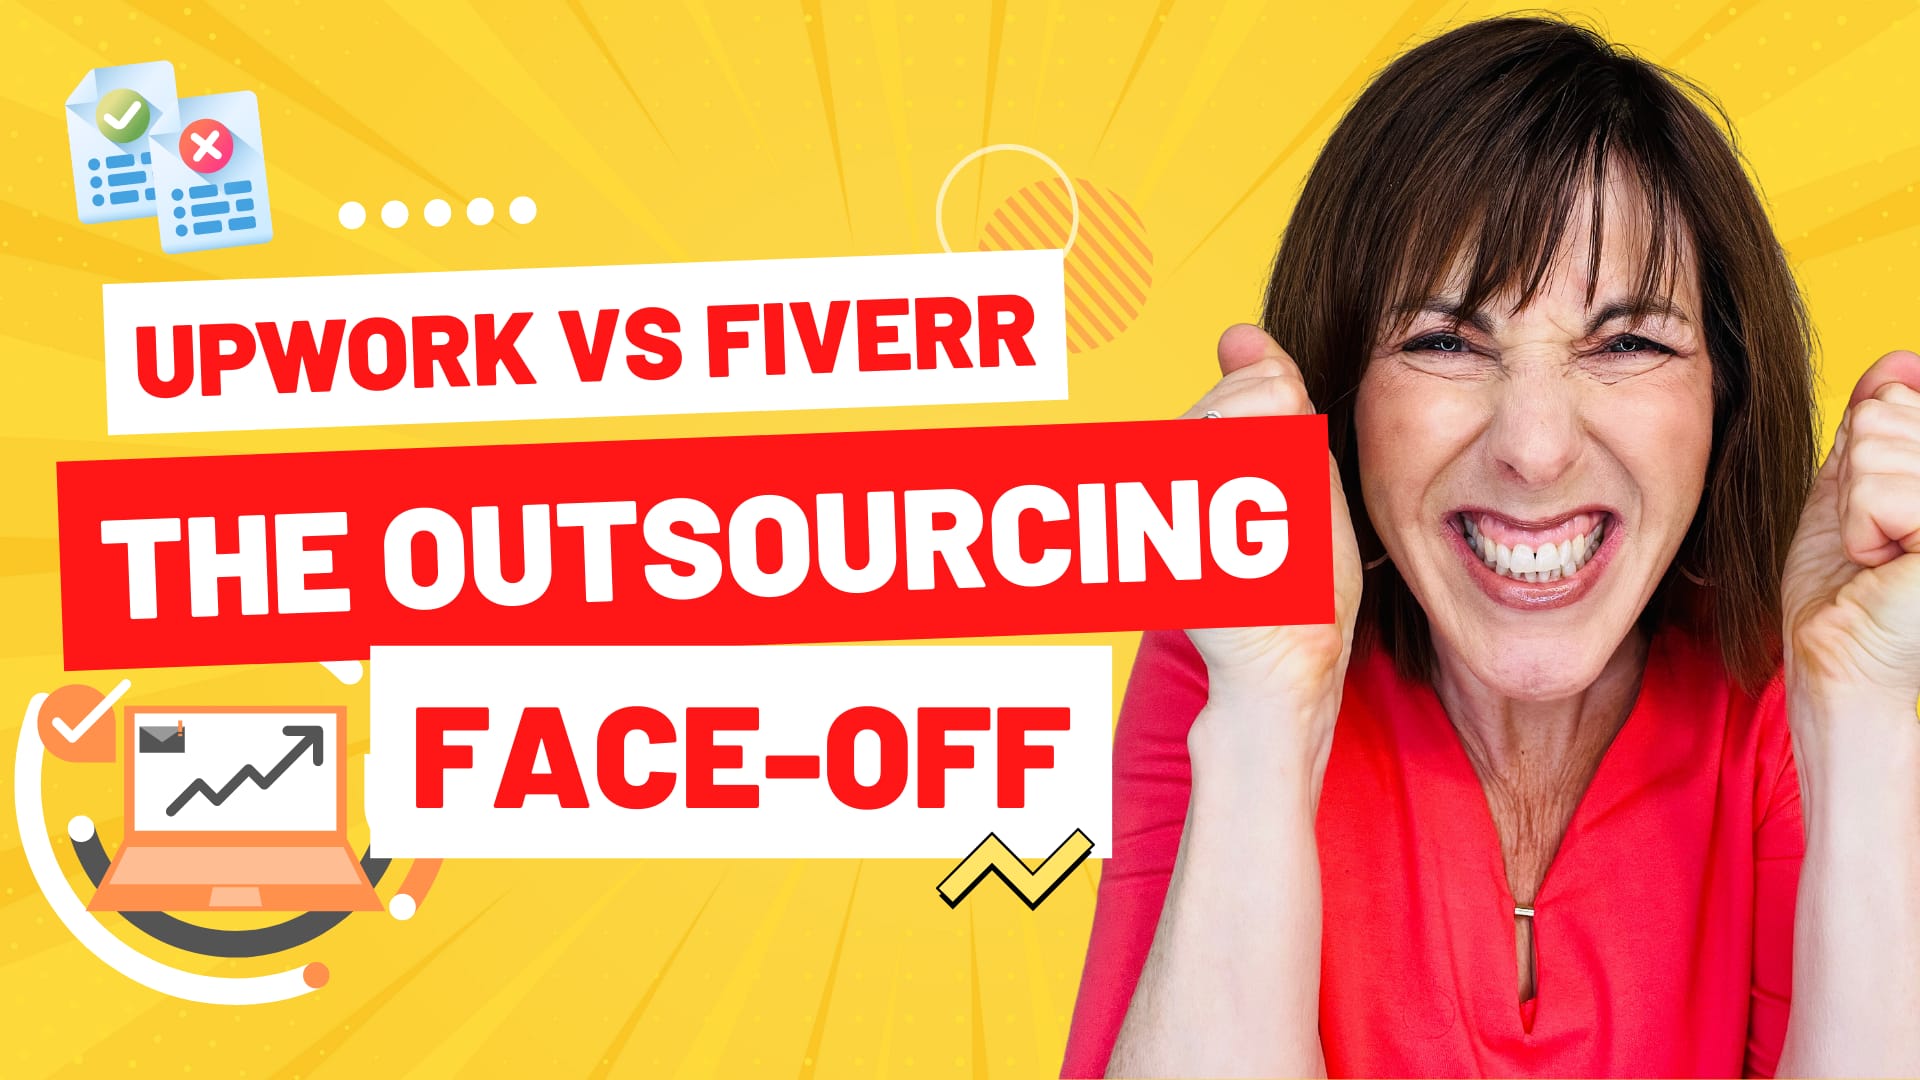 Upwork vs Fiverr - The Outsourcing Face-Off